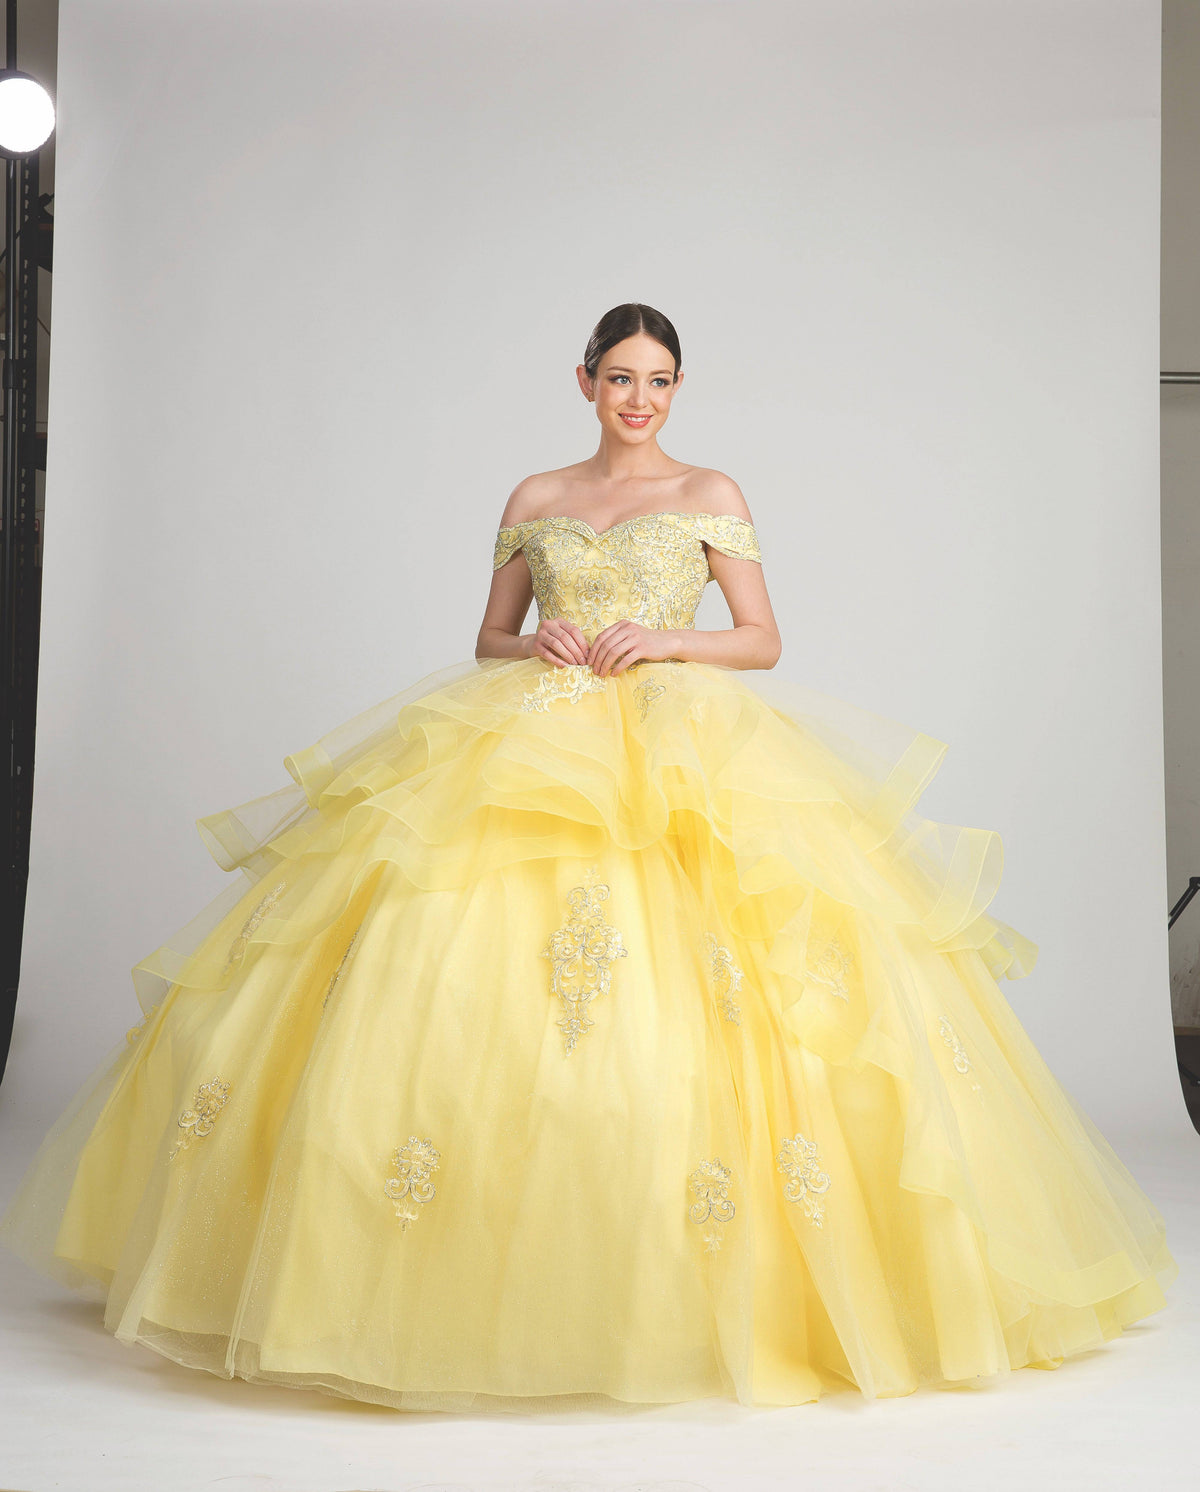 Fiesta 10264 Off Shoulder Stone & Sequin Ball Gown - NORMA REED